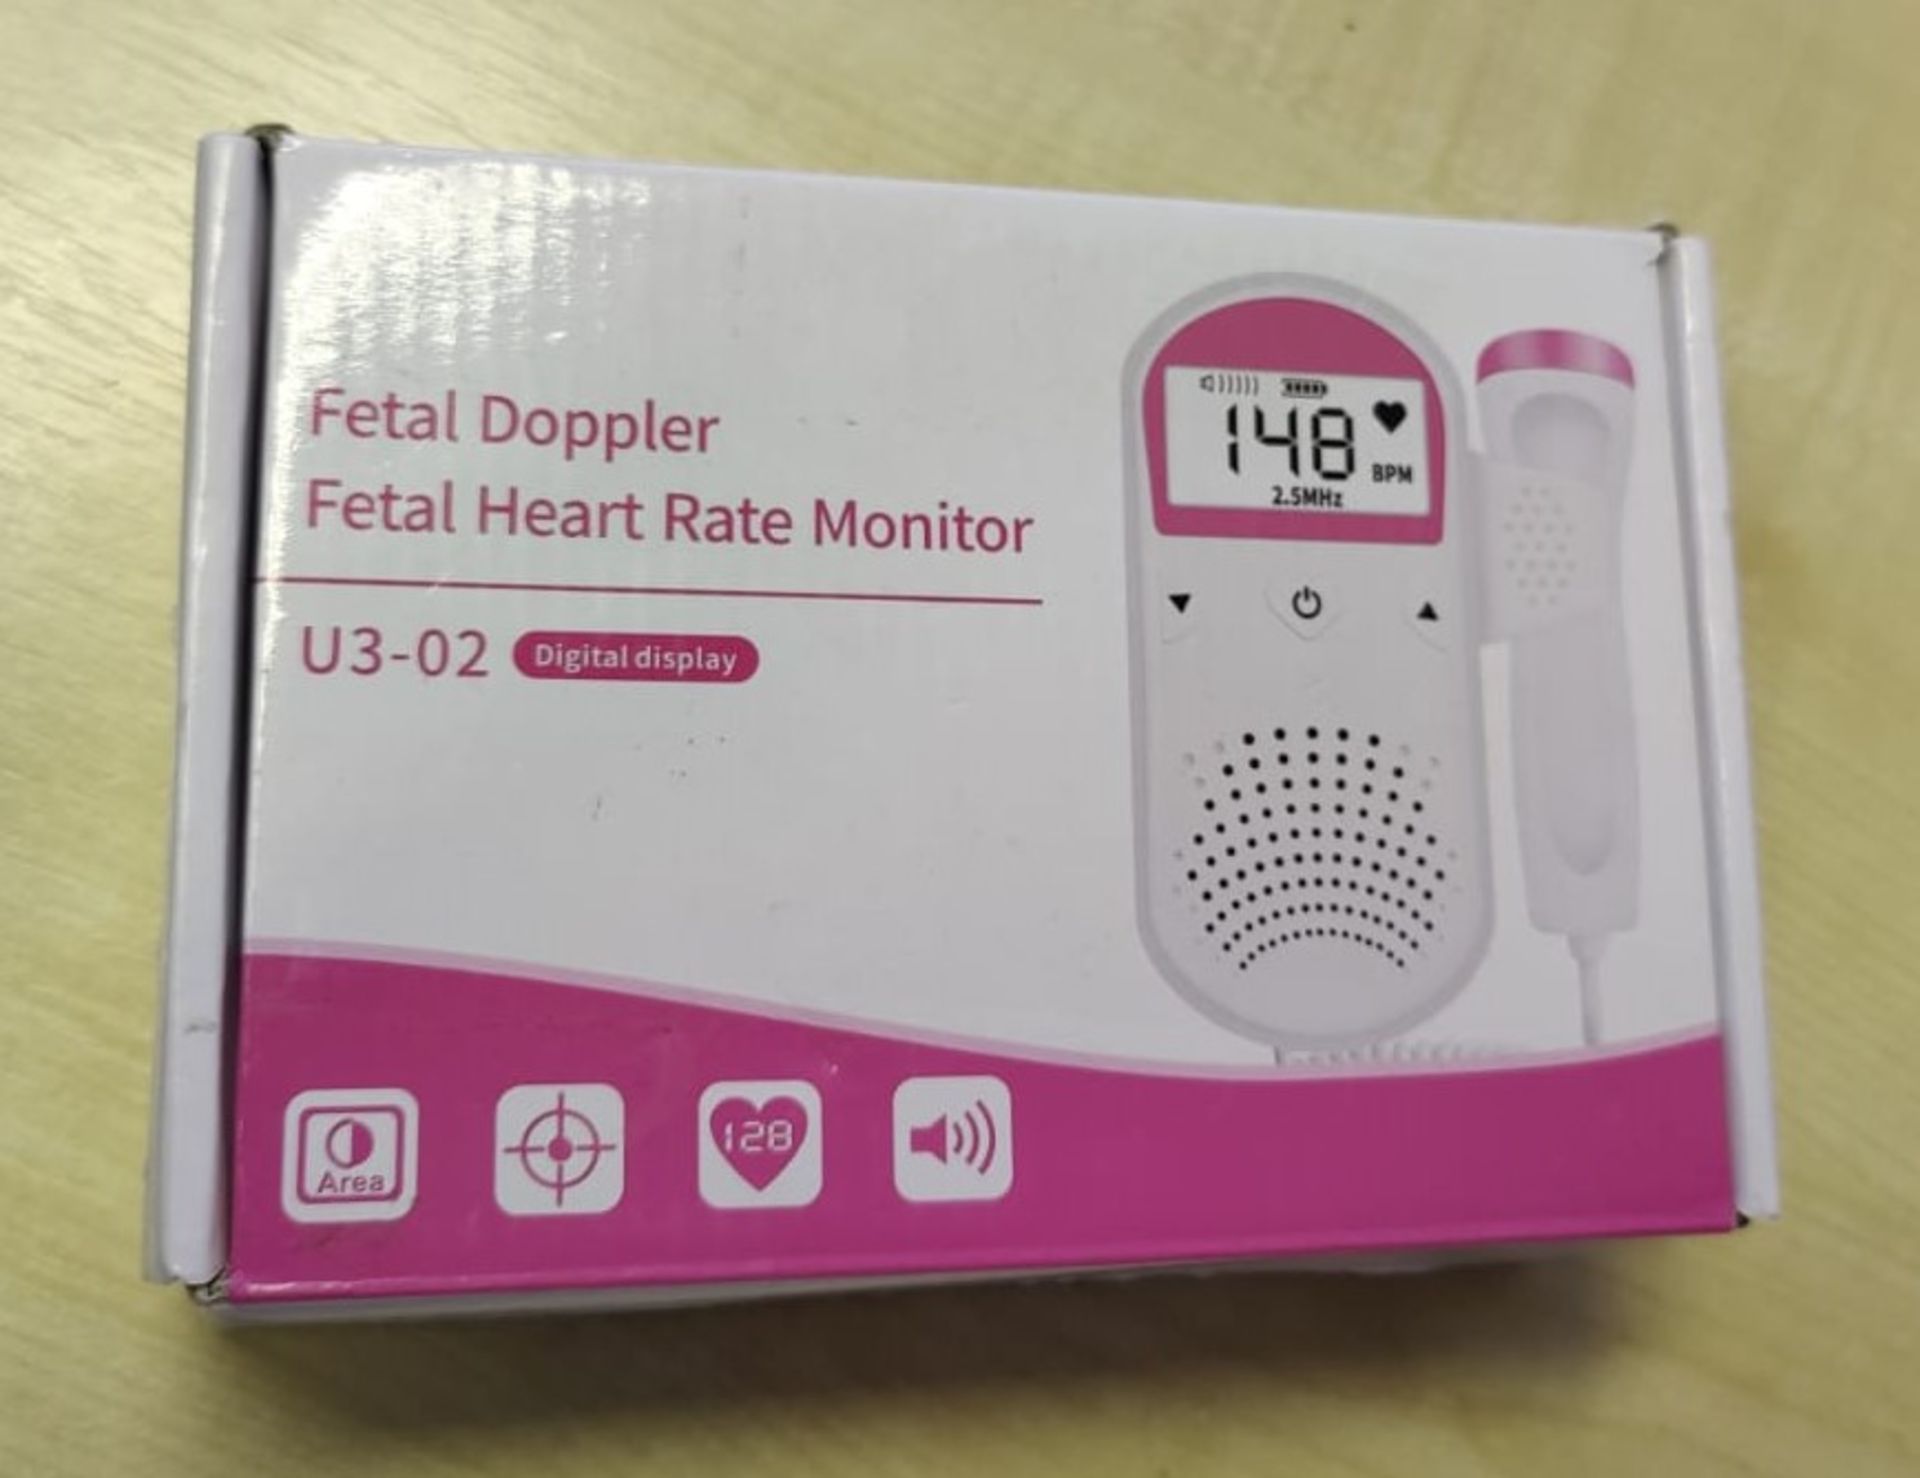 1 x Fetal Doppler Fetal Heat Rate Monitor - Model U3-02 With Digital Display - Boxed With - Image 3 of 3